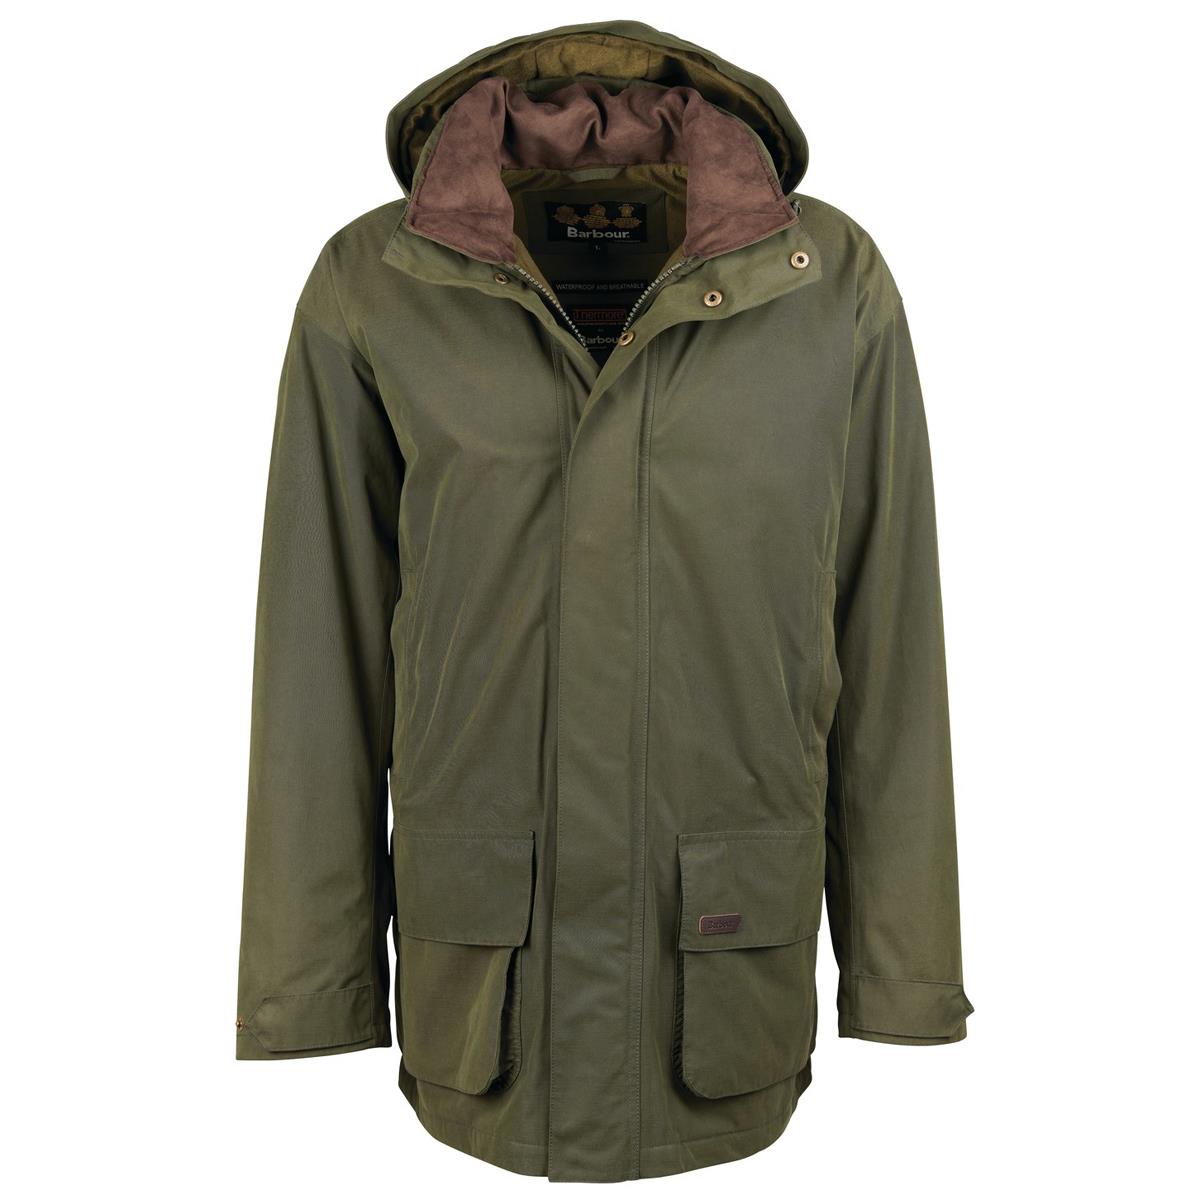 What is the proper way to clean a Barbour Mens Beaconsfield Jacket?